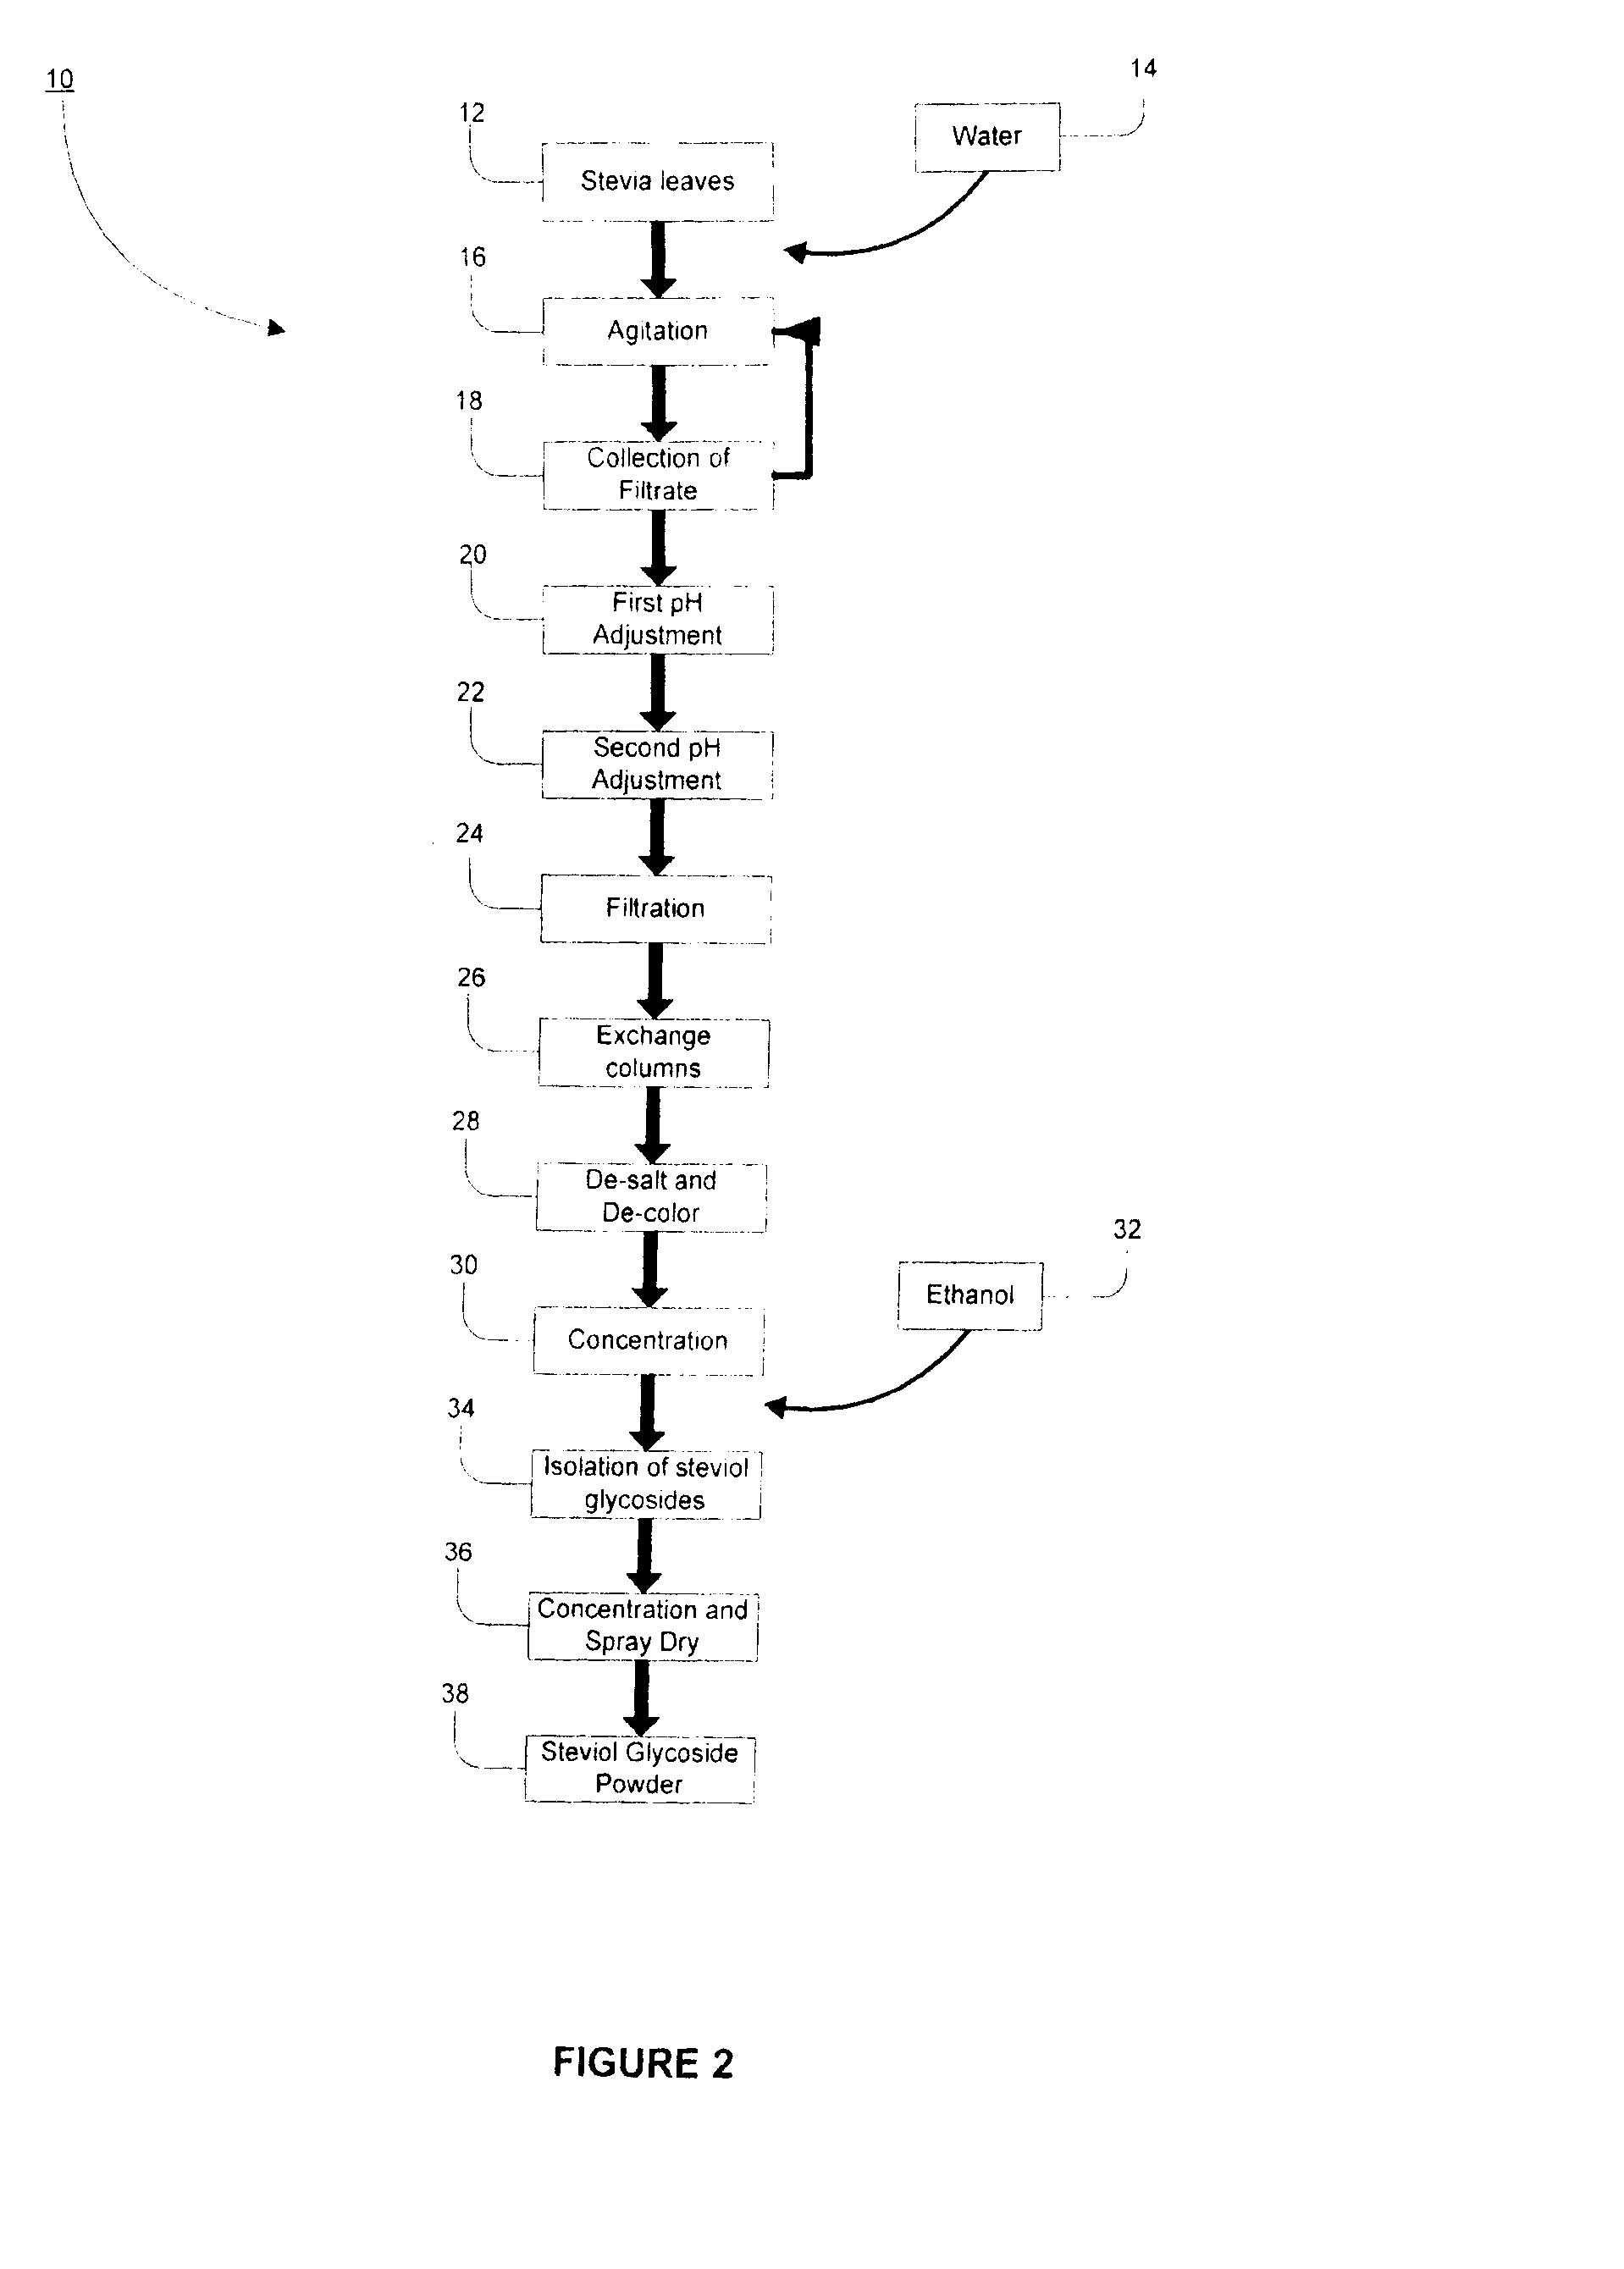 Processes of Purifying Steviol Glycosides Reb C